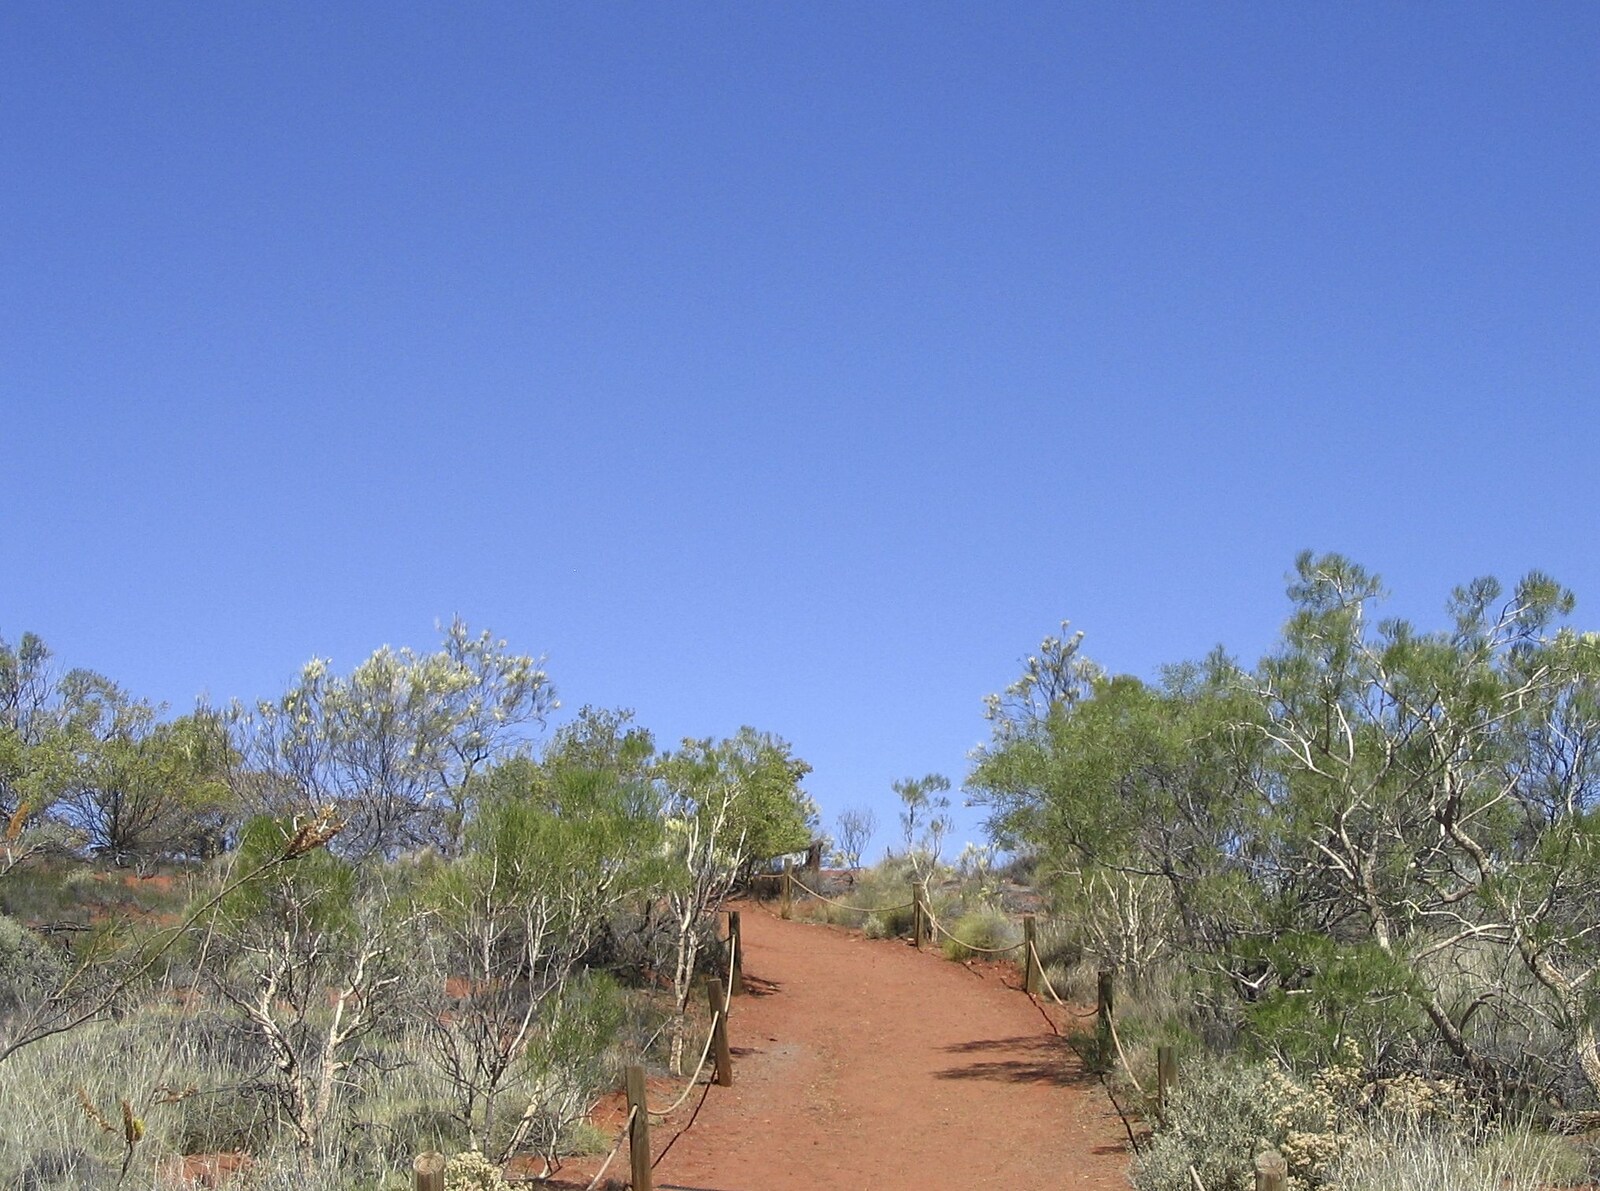 The path leading to an Uluru lookout from The Red Centre: Yulara and Uluru, Northern Territories, Australia - 8th October 2004